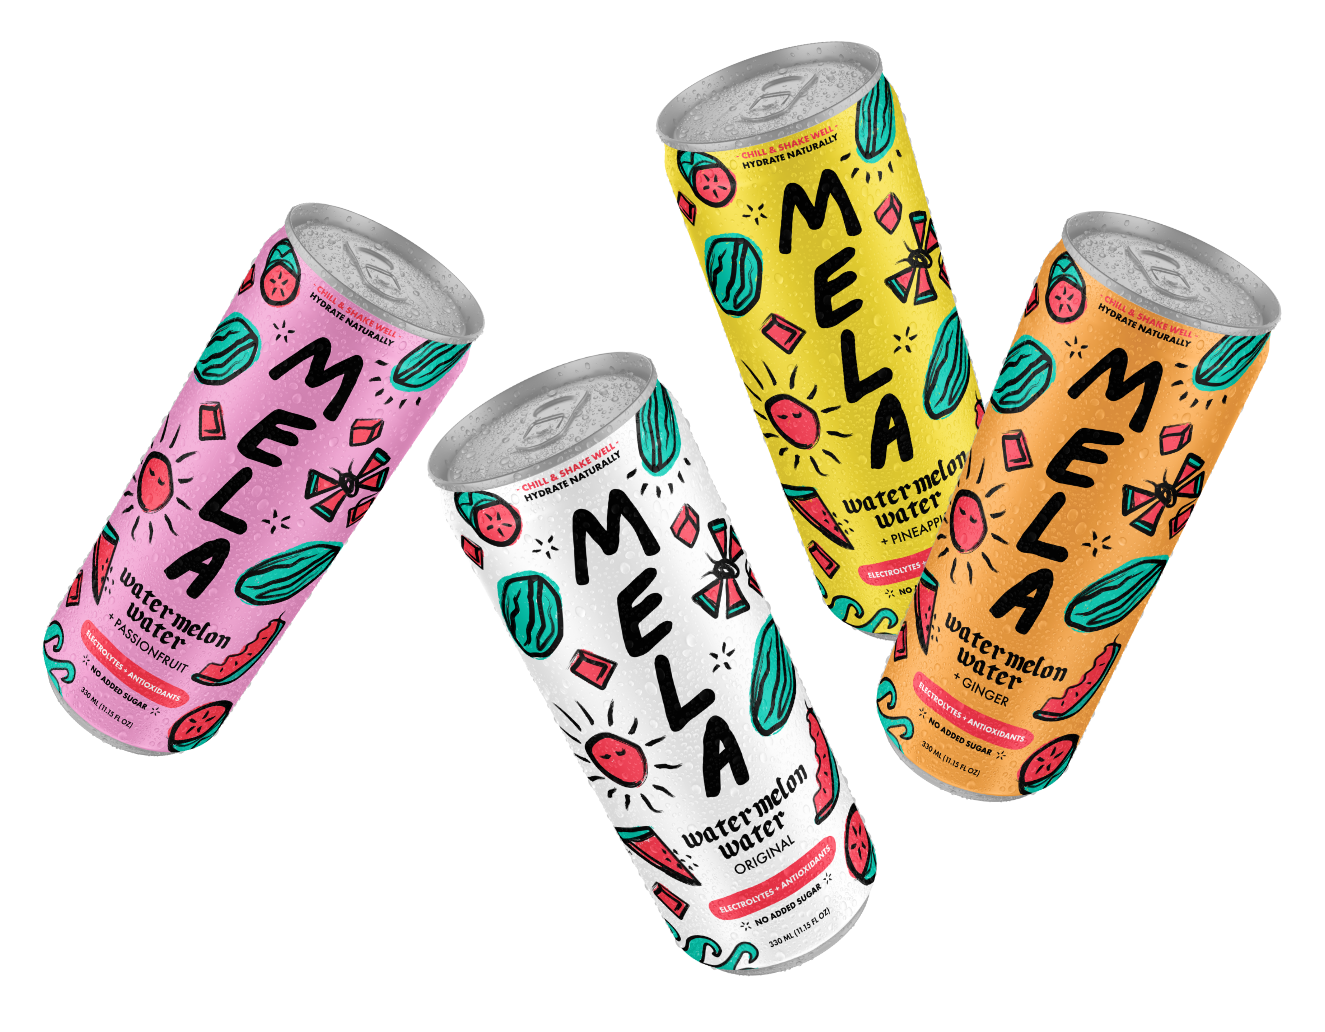 All flavors of Mela cans